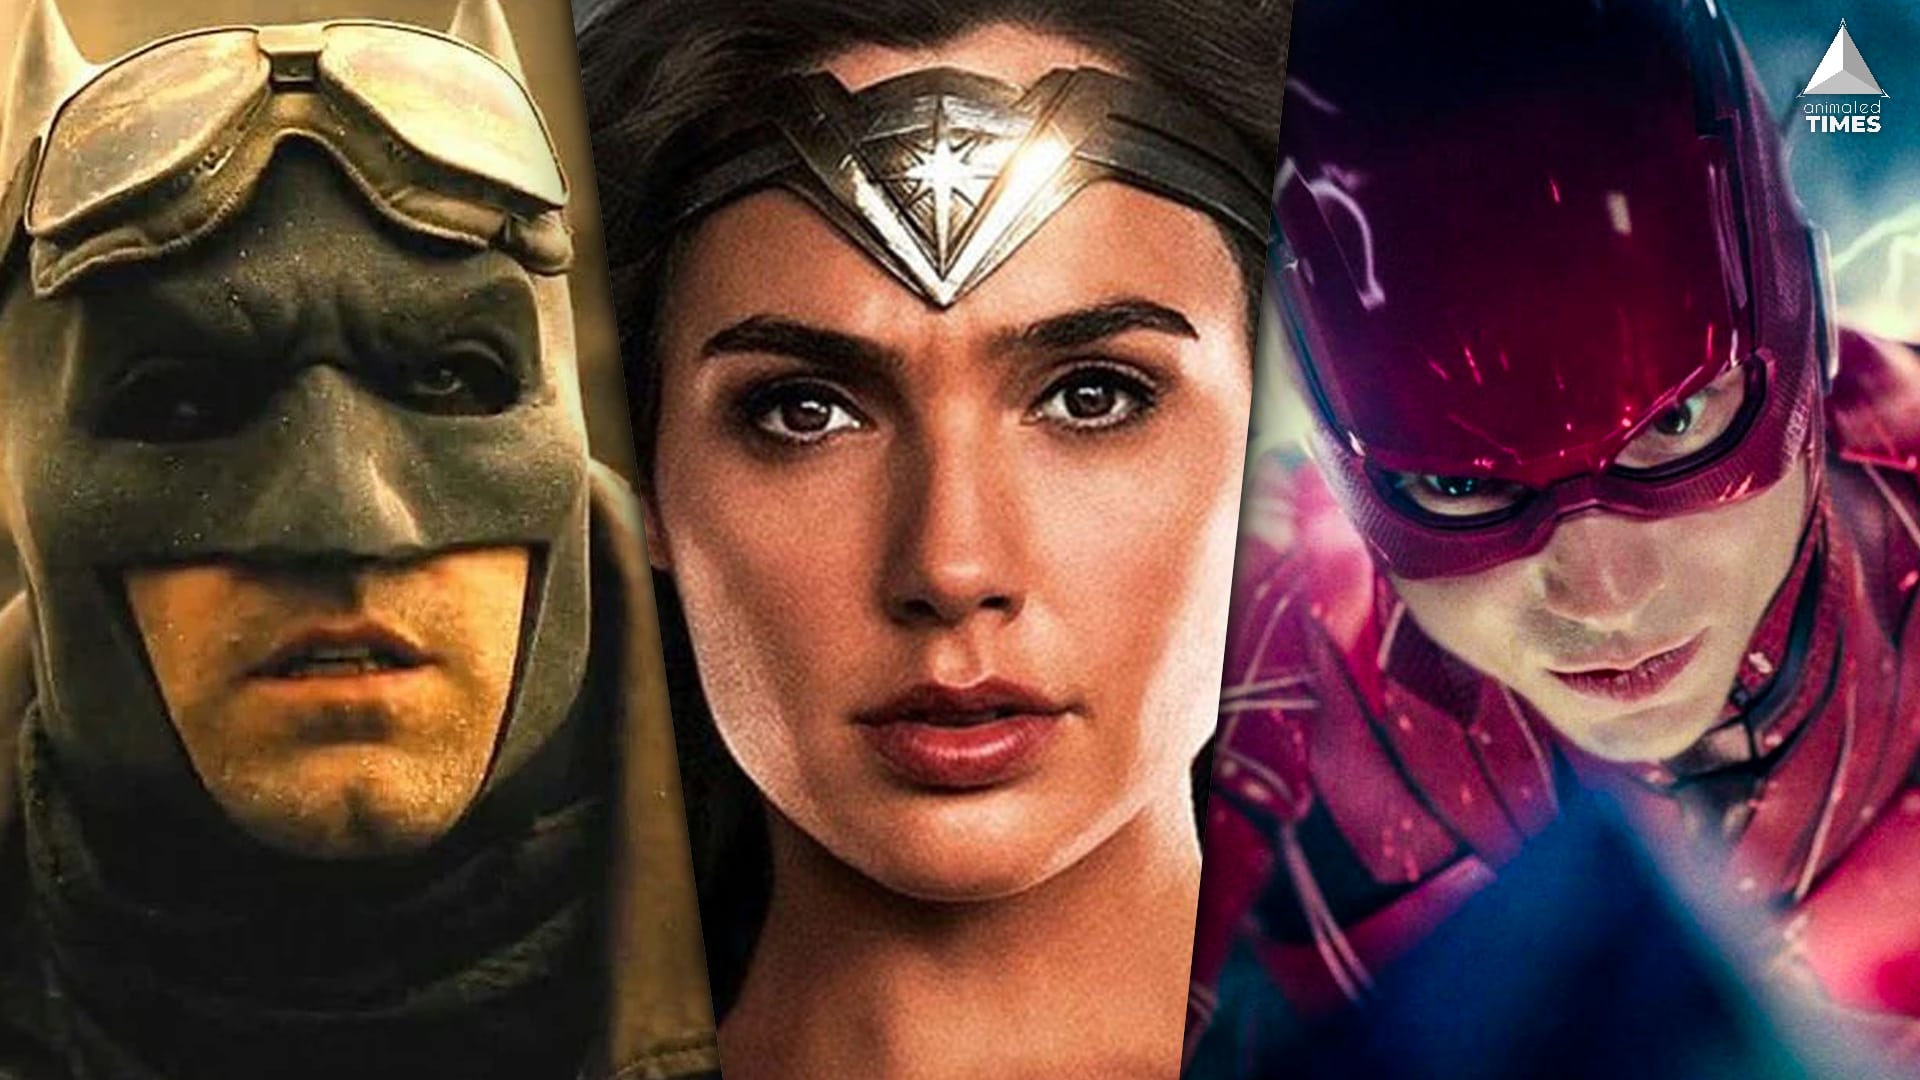 10 Things We Could Have Witnessed From Snyder’s Justice League Sequel